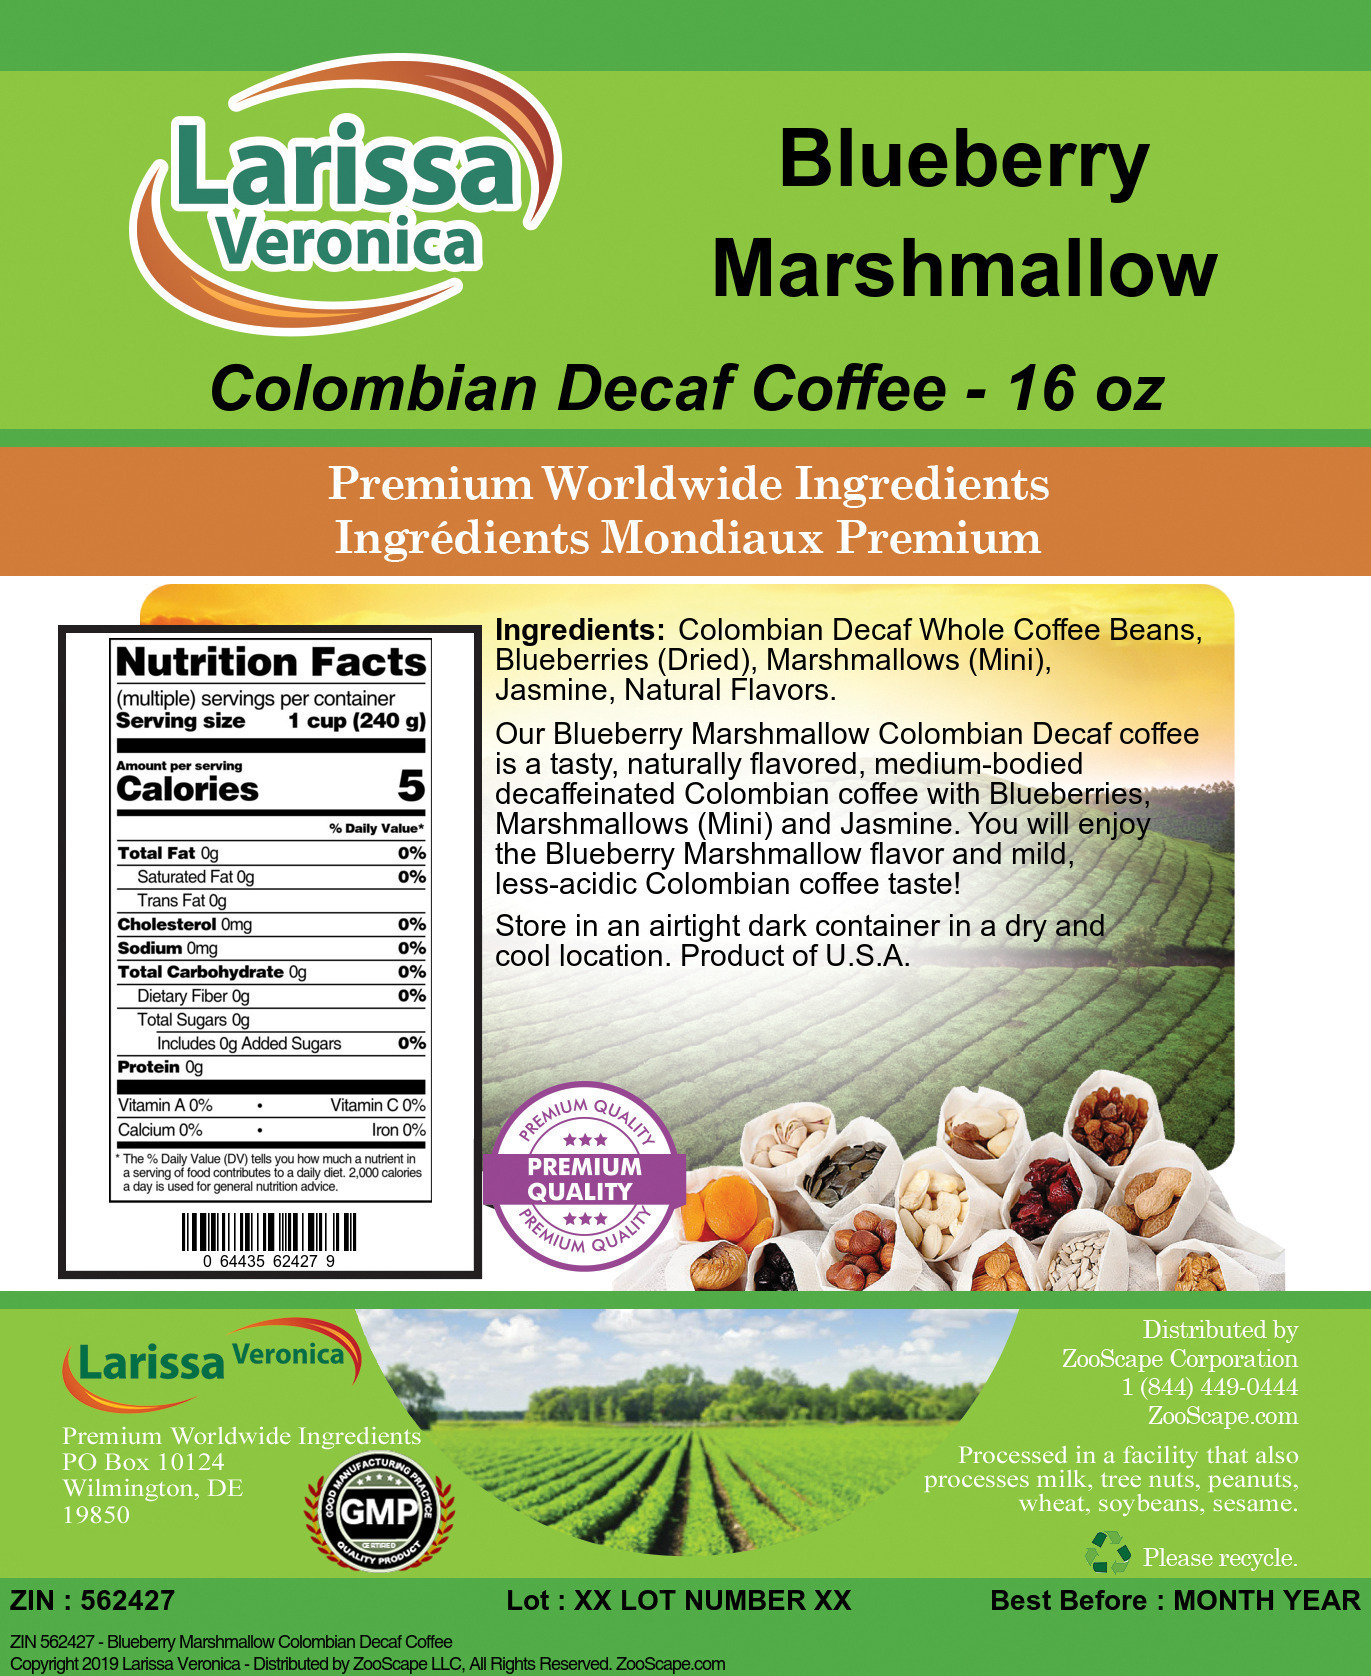 Blueberry Marshmallow Colombian Decaf Coffee - Label